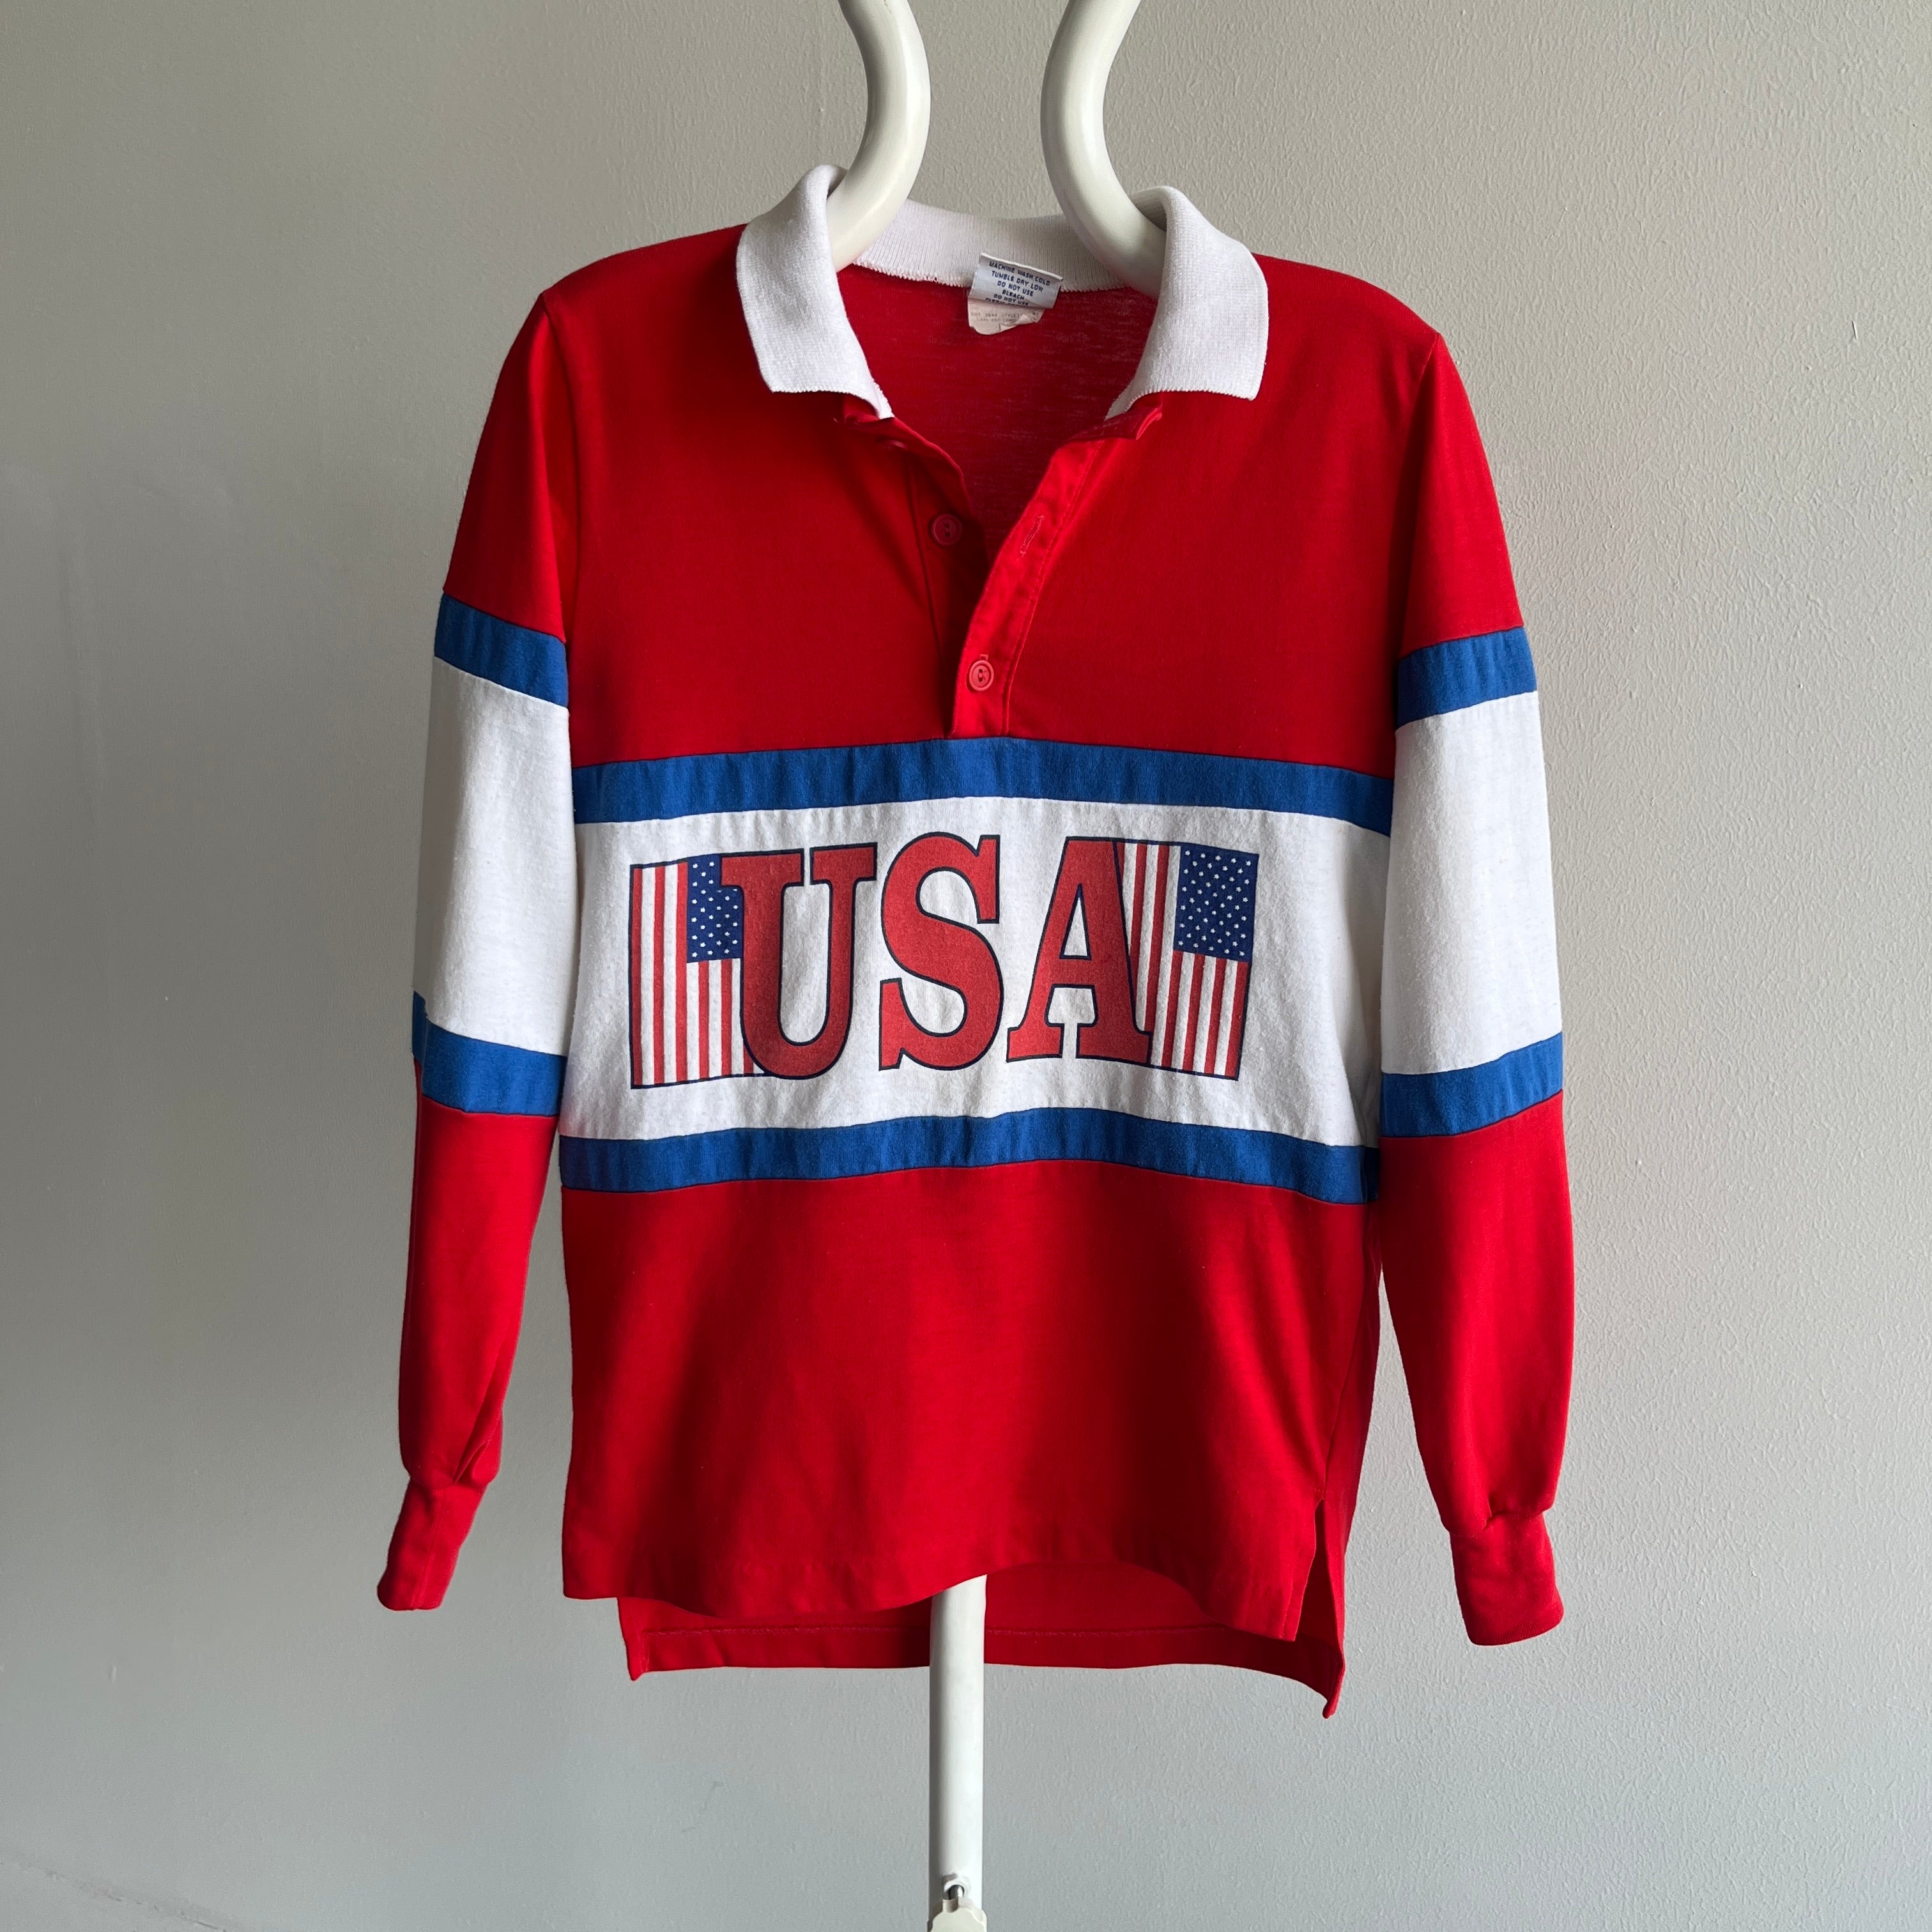 1980/90s USA Rugby T-Shirt by Nutmeg (Lighter weight)